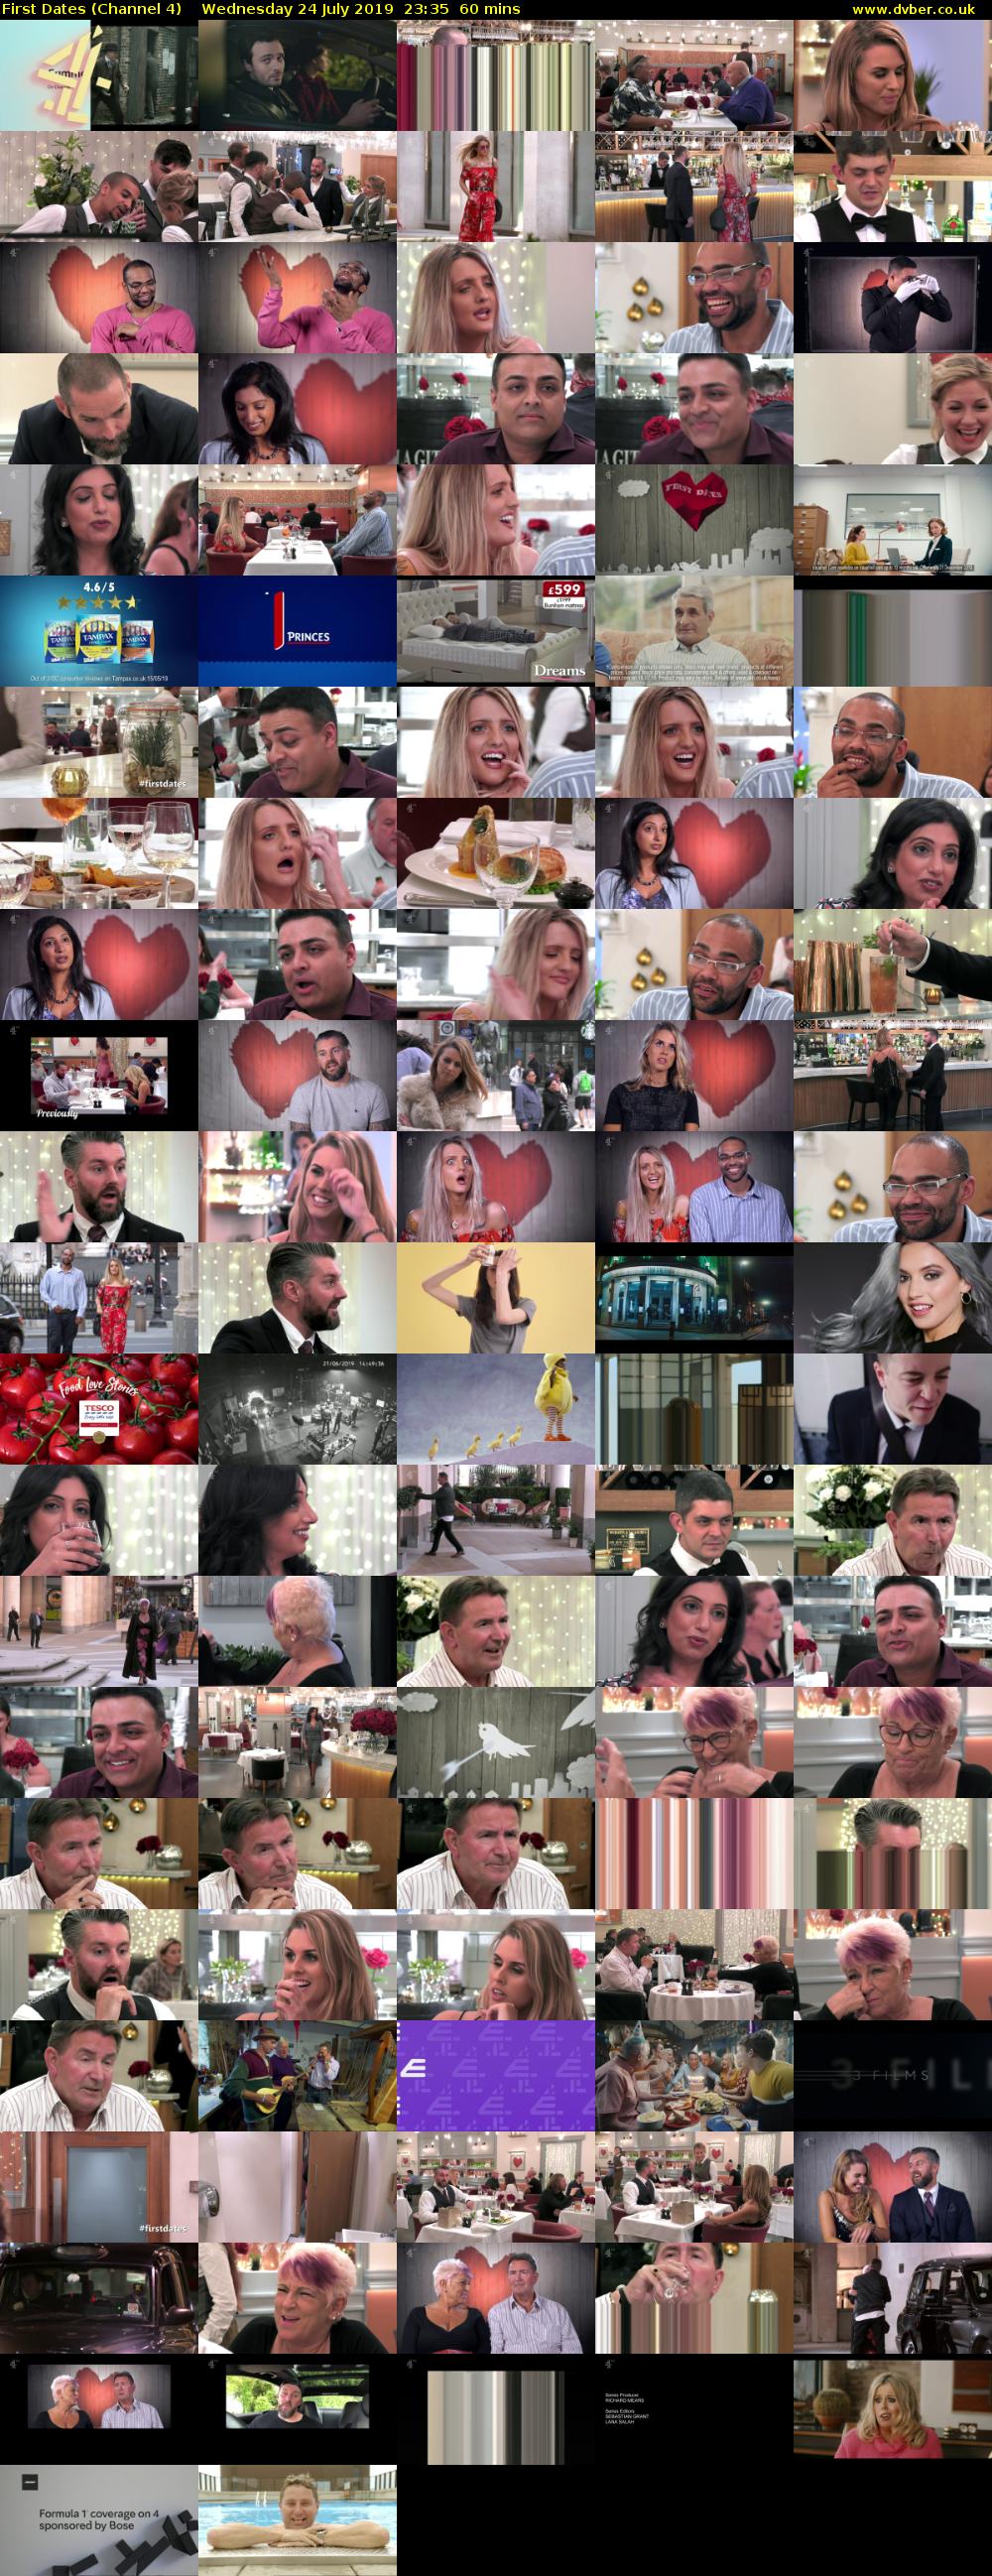 First Dates (Channel 4) Wednesday 24 July 2019 23:35 - 00:35